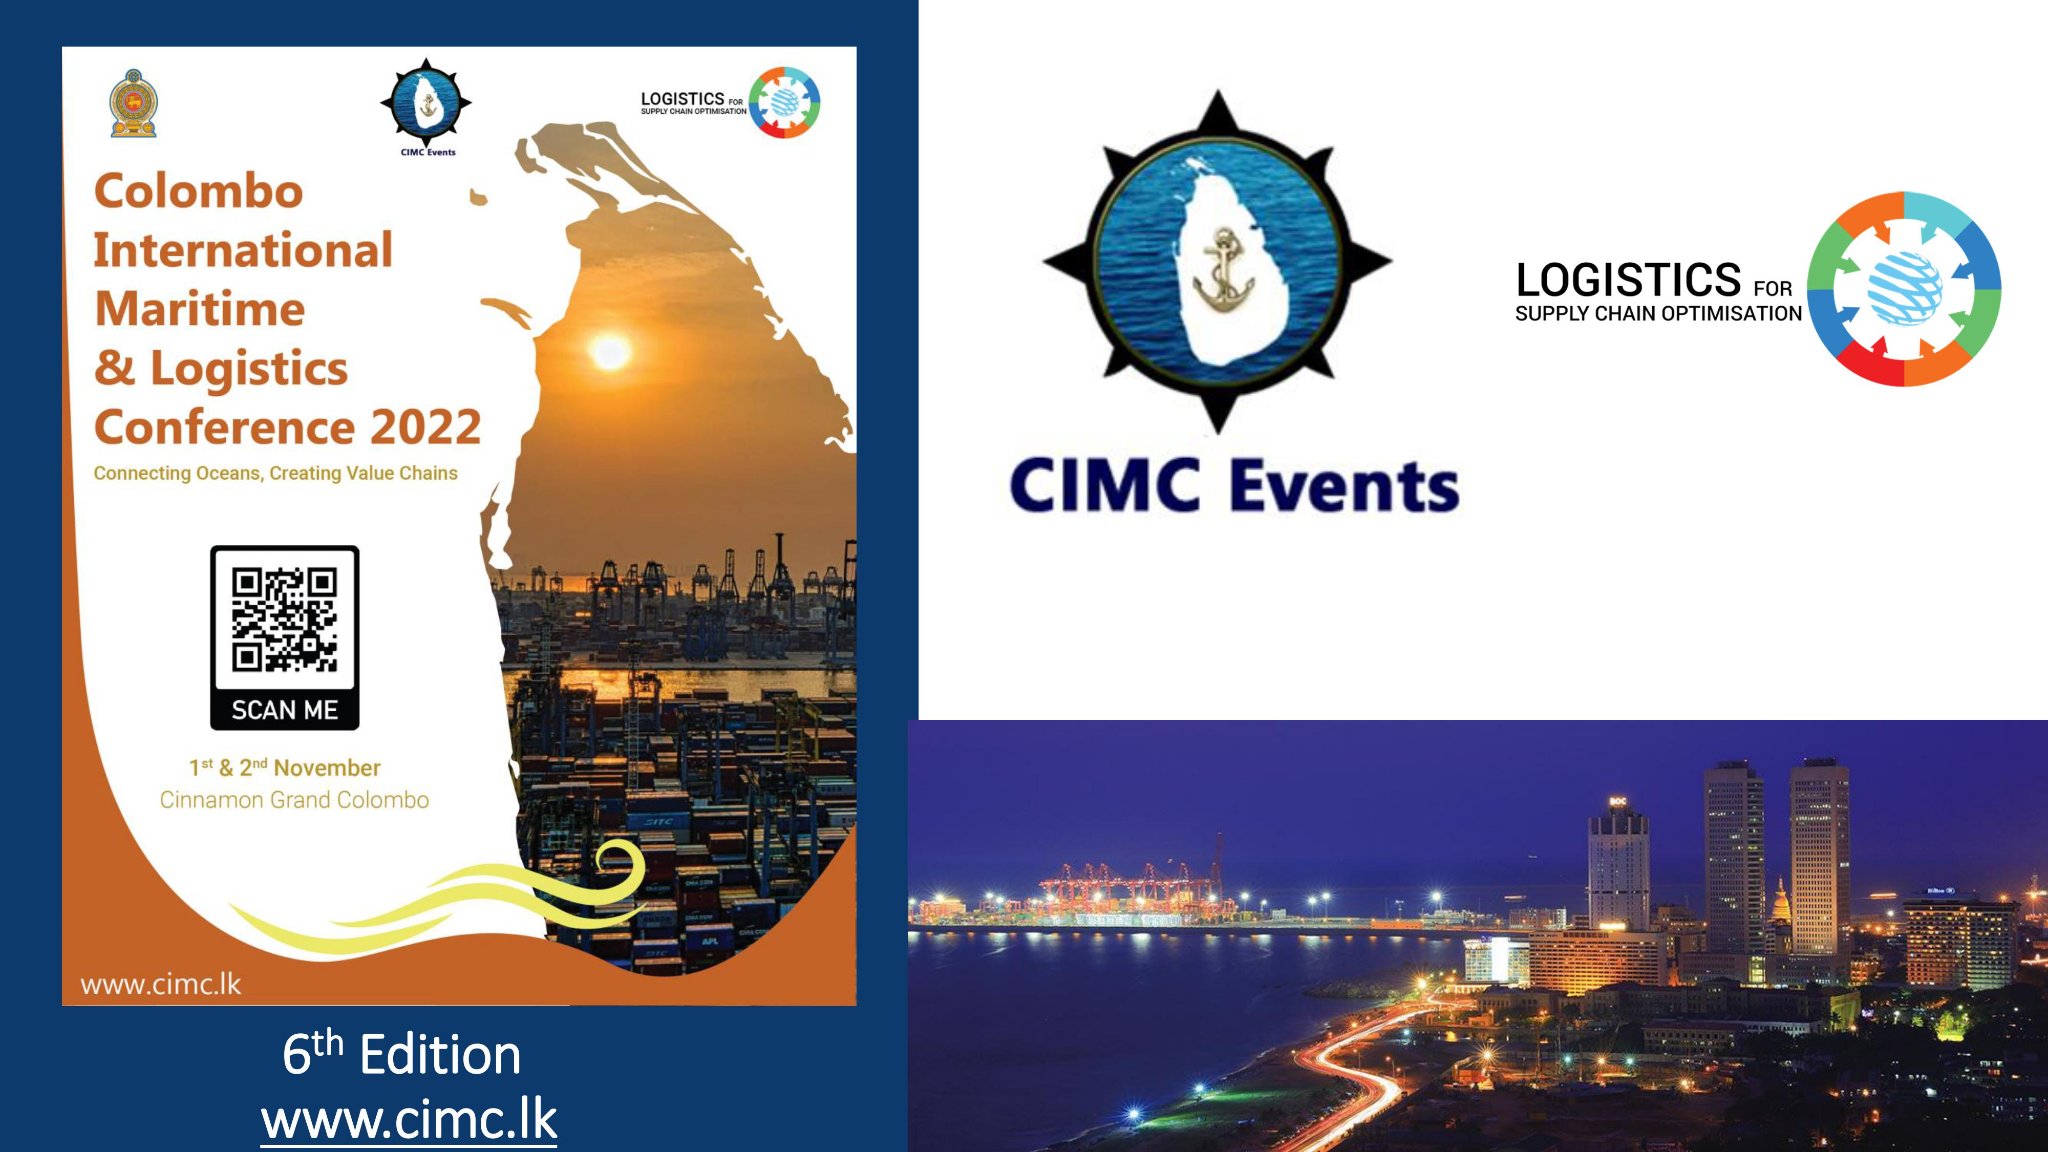 South Asia's First Post-COVID Maritime & Logistics Conference in Colombo on 01st & 02nd November 2022